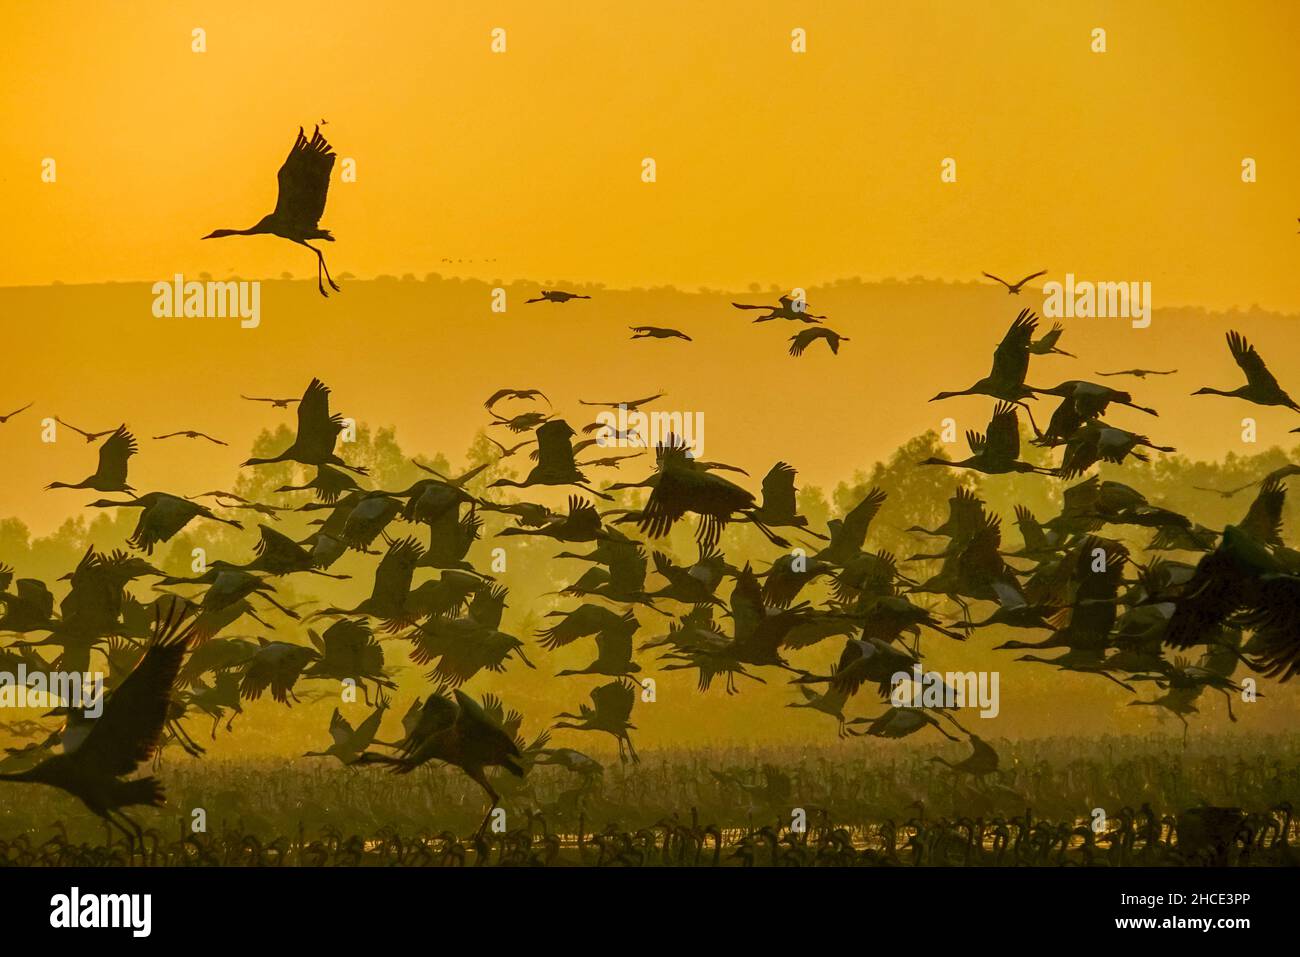 Common crane (Grus grus) Silhouetted at dawn. Photographed in the Hula Valley, Israel, in January Stock Photo